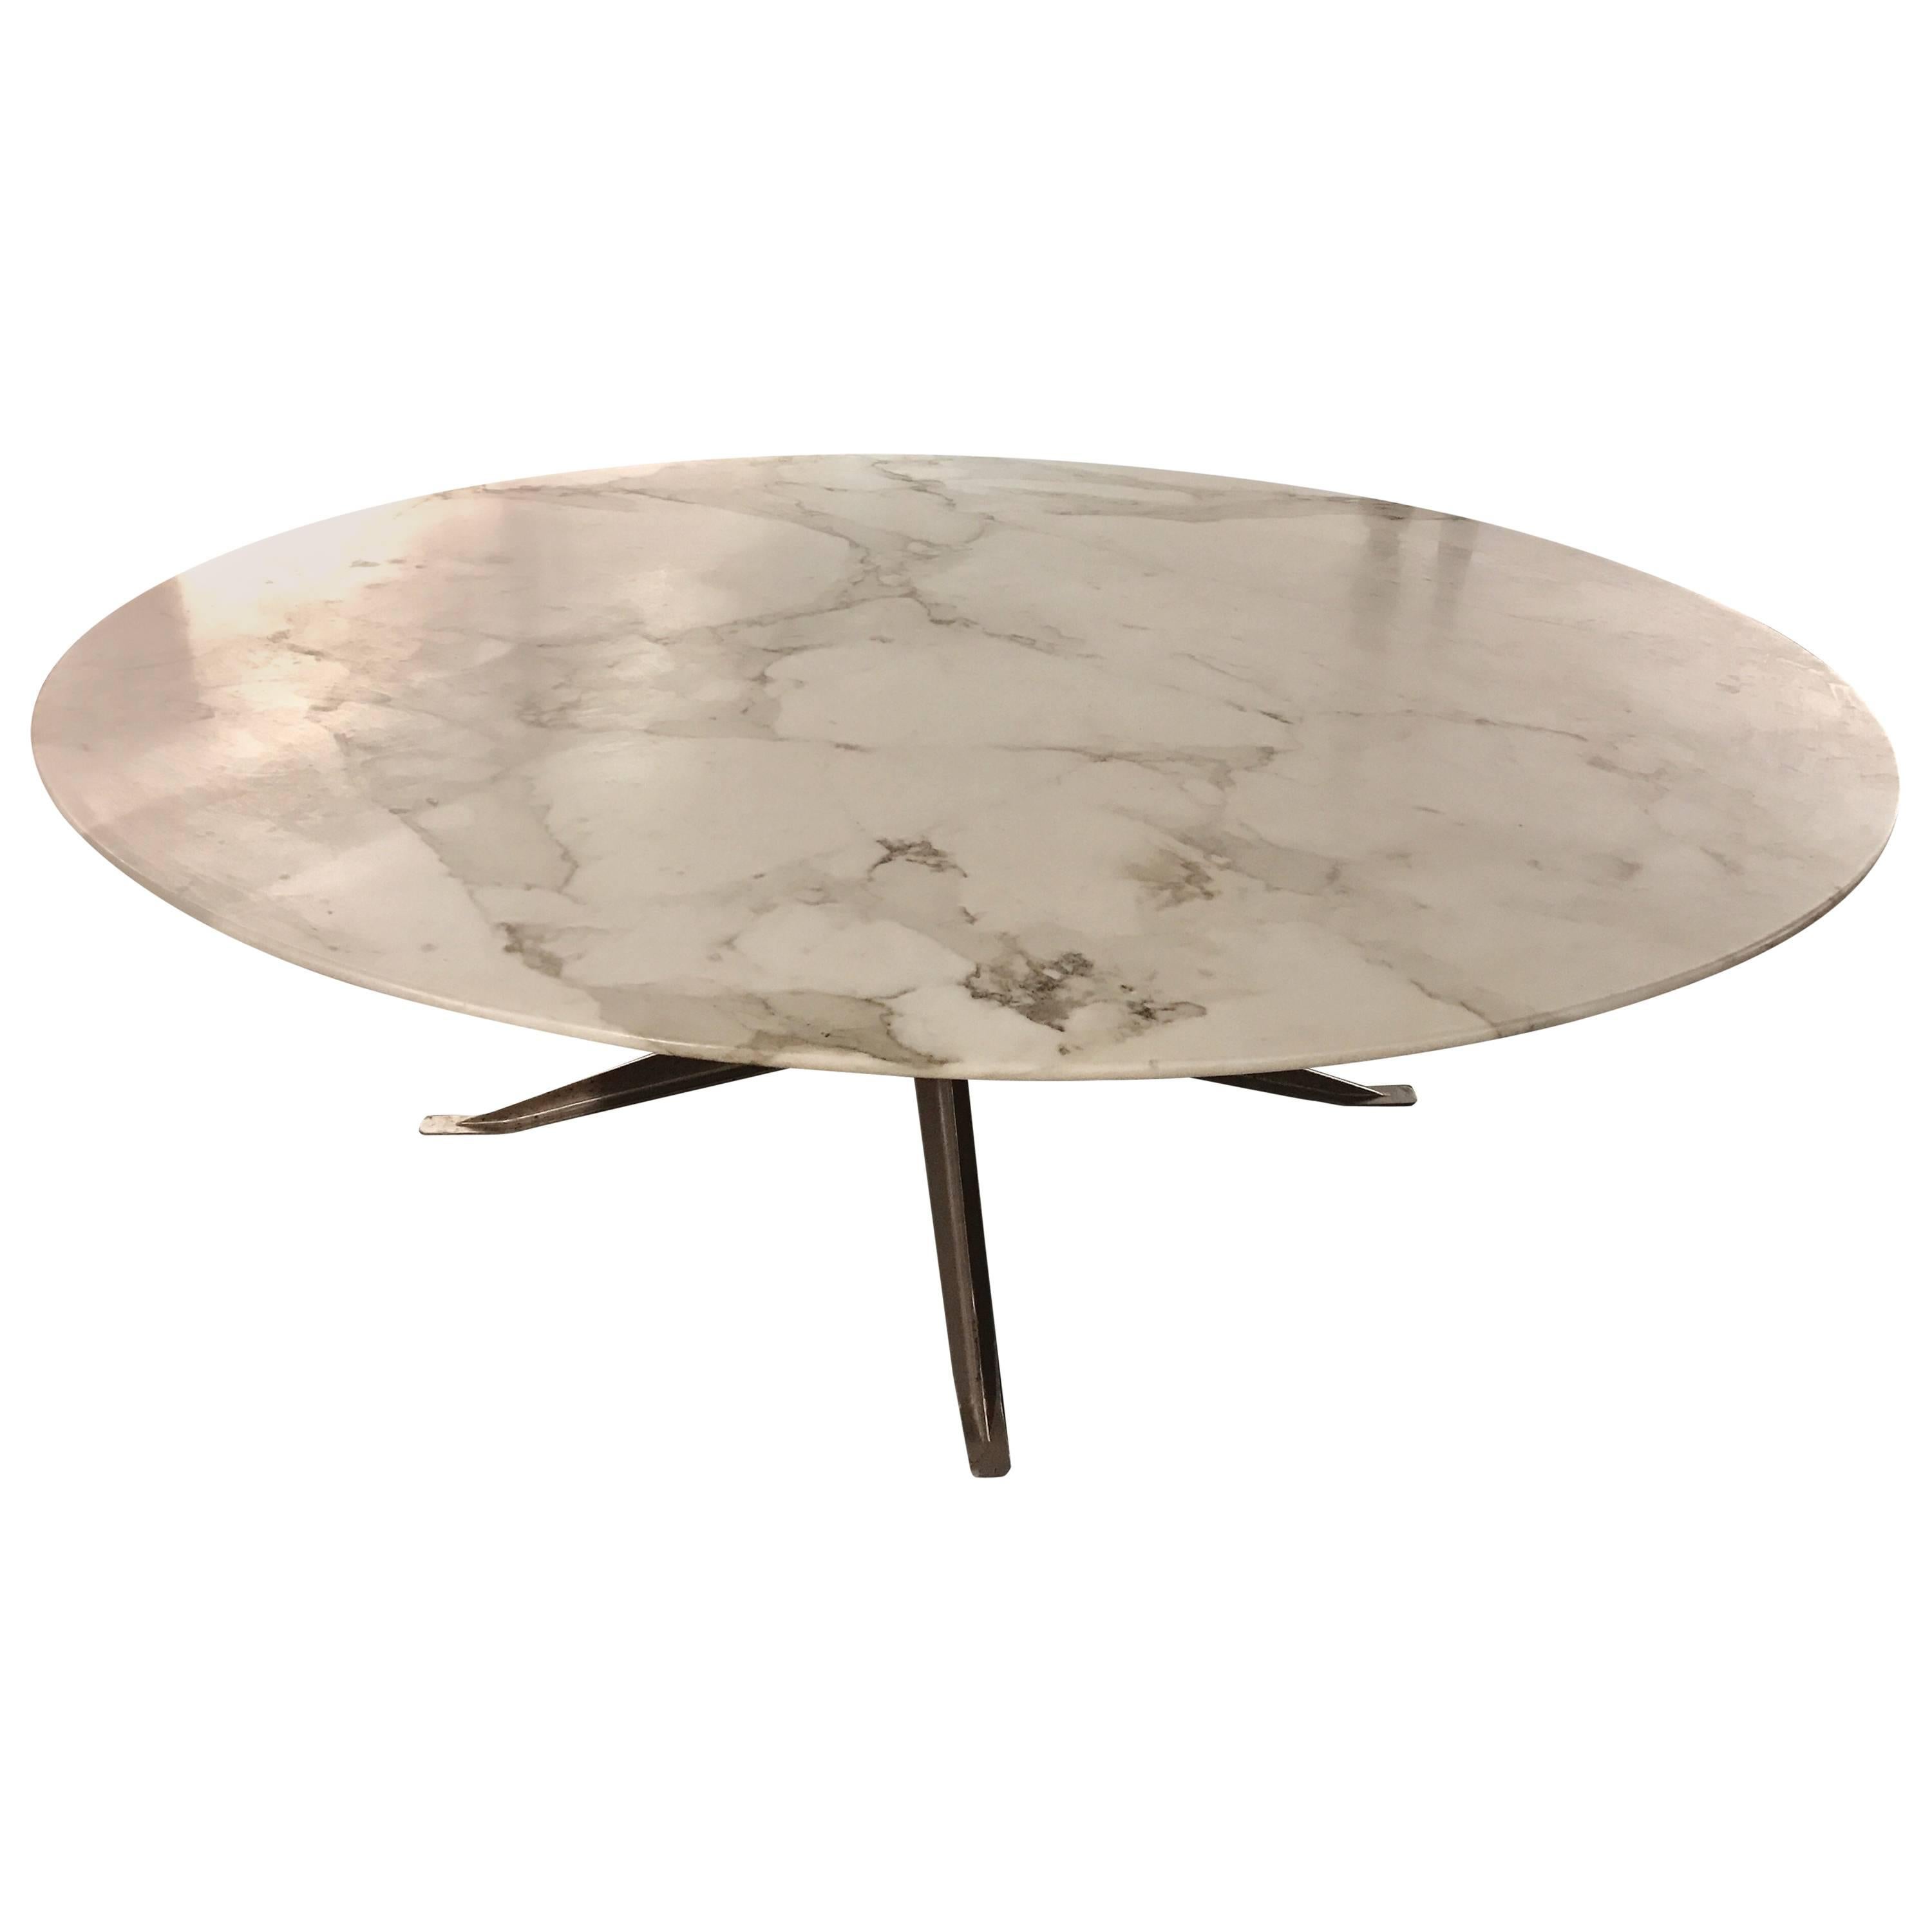 This exceptional grand scale 82" diameter dining or conference table by Florence Knoll has a well selected slab of Calcutta marble. This is most likely a one of a kind table in these dimensions, it was custom-made for the international